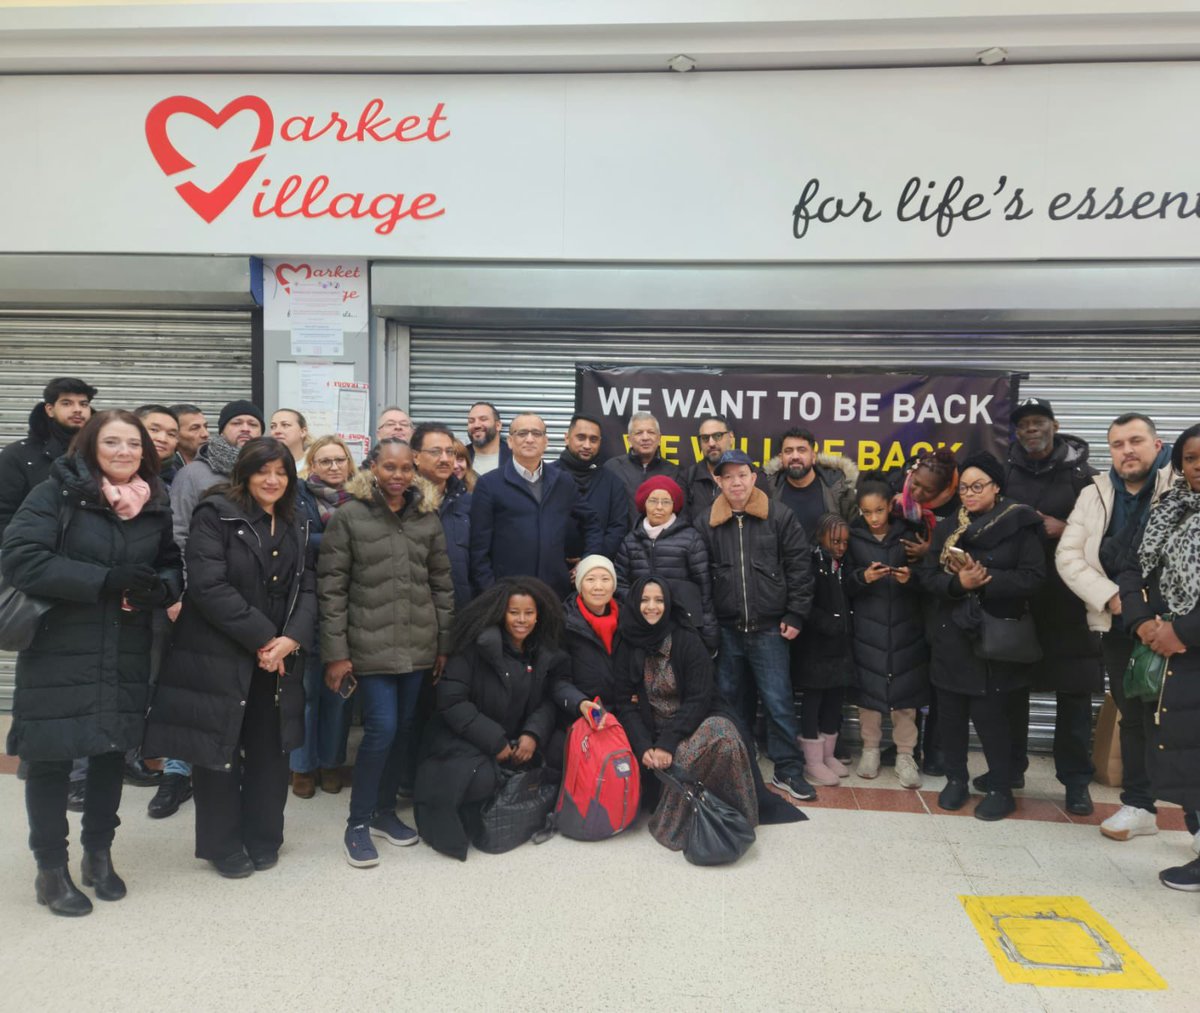 Great news and well done to all involved- the traders and campaigners first and foremost, @SabiaKamali who has been pushing the cause from day 1, @SadiqKhan @howarddawber @stephenctimms @lynbrownmp @NewhamLondon @rokhsanafiaz Cllr Carol Adaja